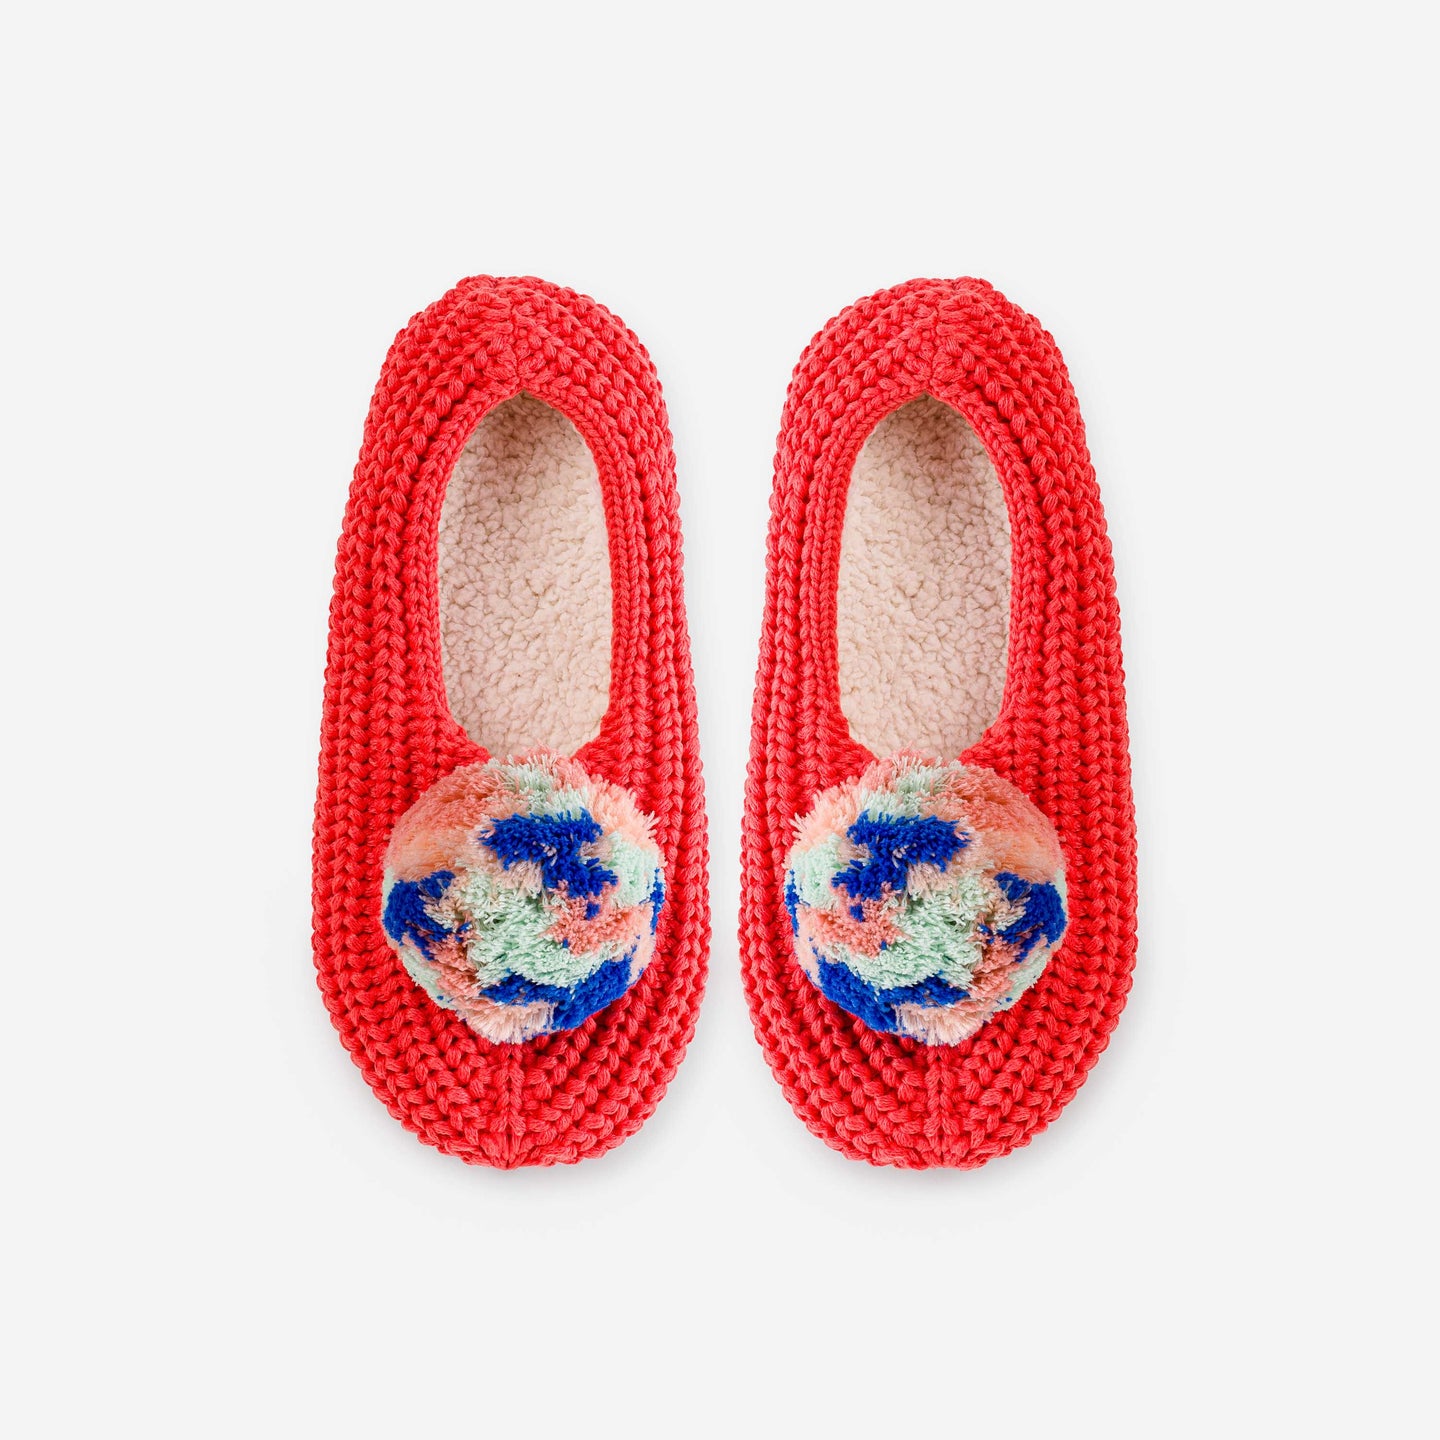 Marble Pommed Rib Knit Indoor Slippers